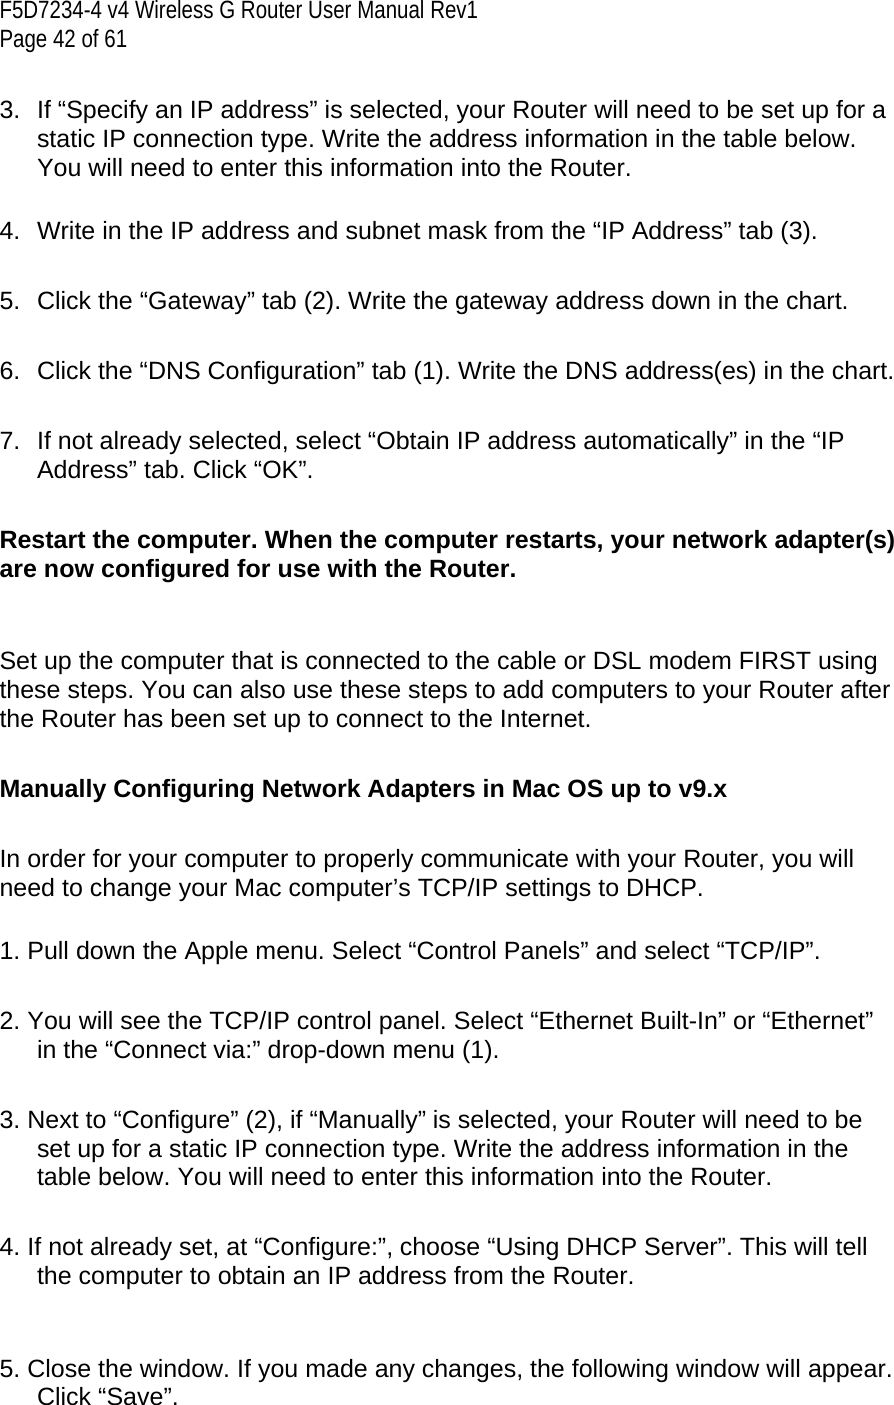 F5D7234-4 v4 Wireless G Router User Manual Rev1  Page 42 of 61   3.  If “Specify an IP address” is selected, your Router will need to be set up for a static IP connection type. Write the address information in the table below. You will need to enter this information into the Router.  4.  Write in the IP address and subnet mask from the “IP Address” tab (3).  5.  Click the “Gateway” tab (2). Write the gateway address down in the chart.  6.  Click the “DNS Configuration” tab (1). Write the DNS address(es) in the chart.  7.  If not already selected, select “Obtain IP address automatically” in the “IP Address” tab. Click “OK”.  Restart the computer. When the computer restarts, your network adapter(s) are now configured for use with the Router.   Set up the computer that is connected to the cable or DSL modem FIRST using these steps. You can also use these steps to add computers to your Router after the Router has been set up to connect to the Internet.  Manually Configuring Network Adapters in Mac OS up to v9.x  In order for your computer to properly communicate with your Router, you will need to change your Mac computer’s TCP/IP settings to DHCP.  1. Pull down the Apple menu. Select “Control Panels” and select “TCP/IP”.  2. You will see the TCP/IP control panel. Select “Ethernet Built-In” or “Ethernet” in the “Connect via:” drop-down menu (1).   3. Next to “Configure” (2), if “Manually” is selected, your Router will need to be set up for a static IP connection type. Write the address information in the table below. You will need to enter this information into the Router.  4. If not already set, at “Configure:”, choose “Using DHCP Server”. This will tell the computer to obtain an IP address from the Router.    5. Close the window. If you made any changes, the following window will appear. Click “Save”.  